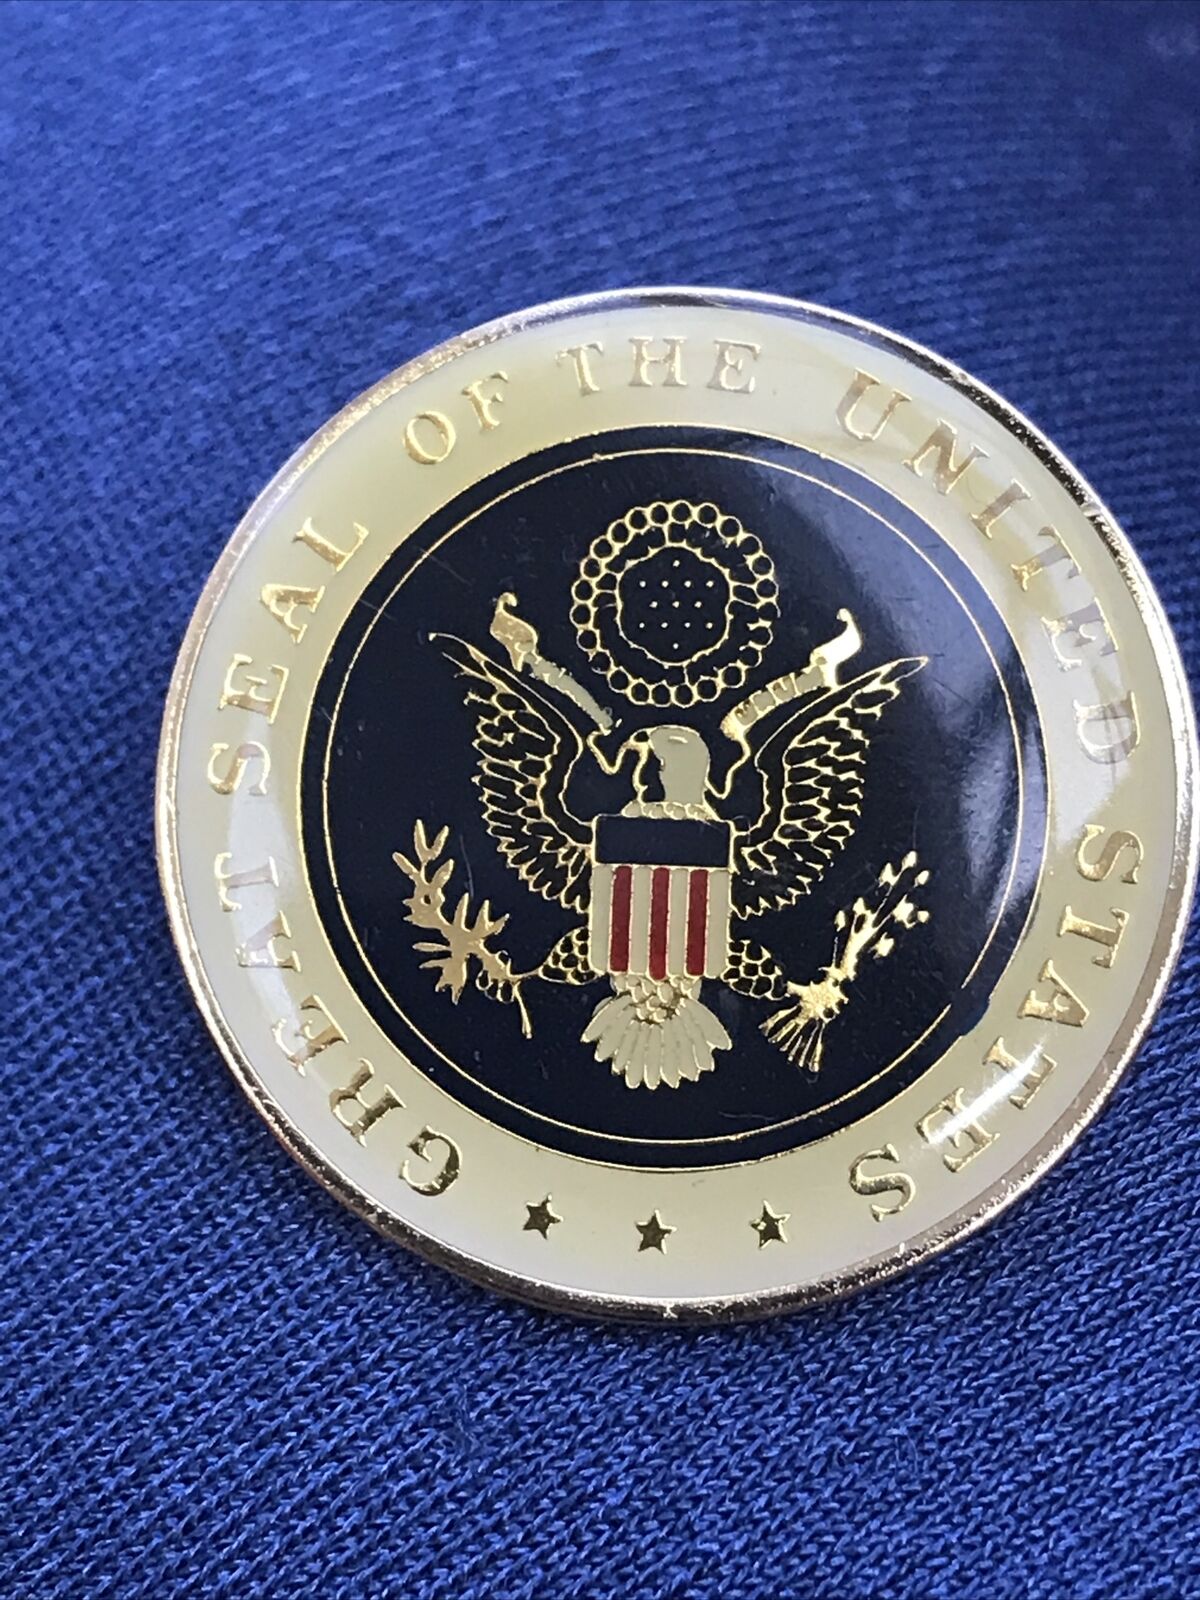 Great Seal Of The United States pin. Gold reflective letters. Kept as a treasure